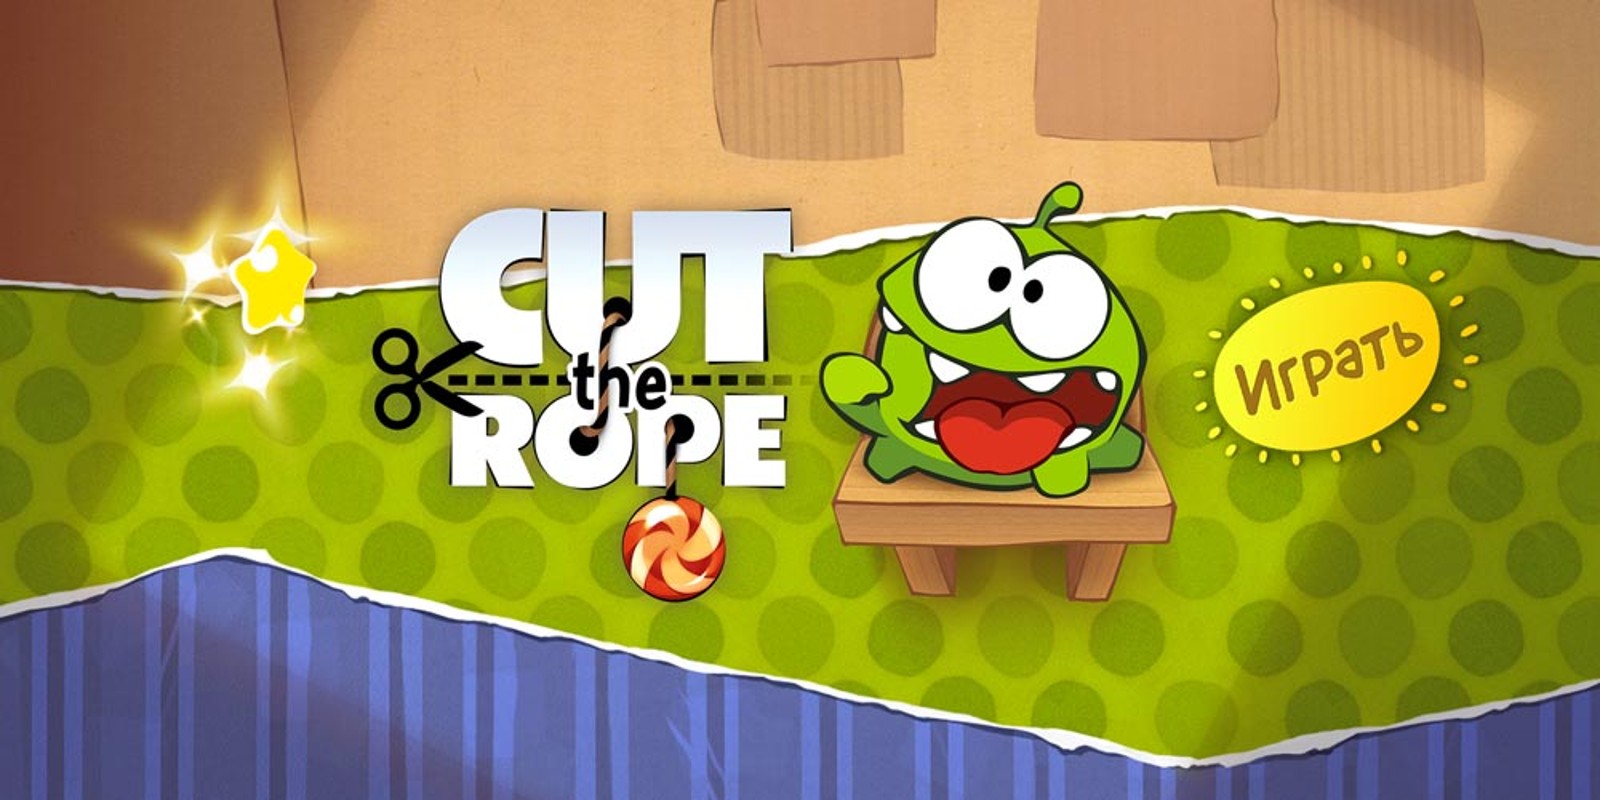 27 cut the rope